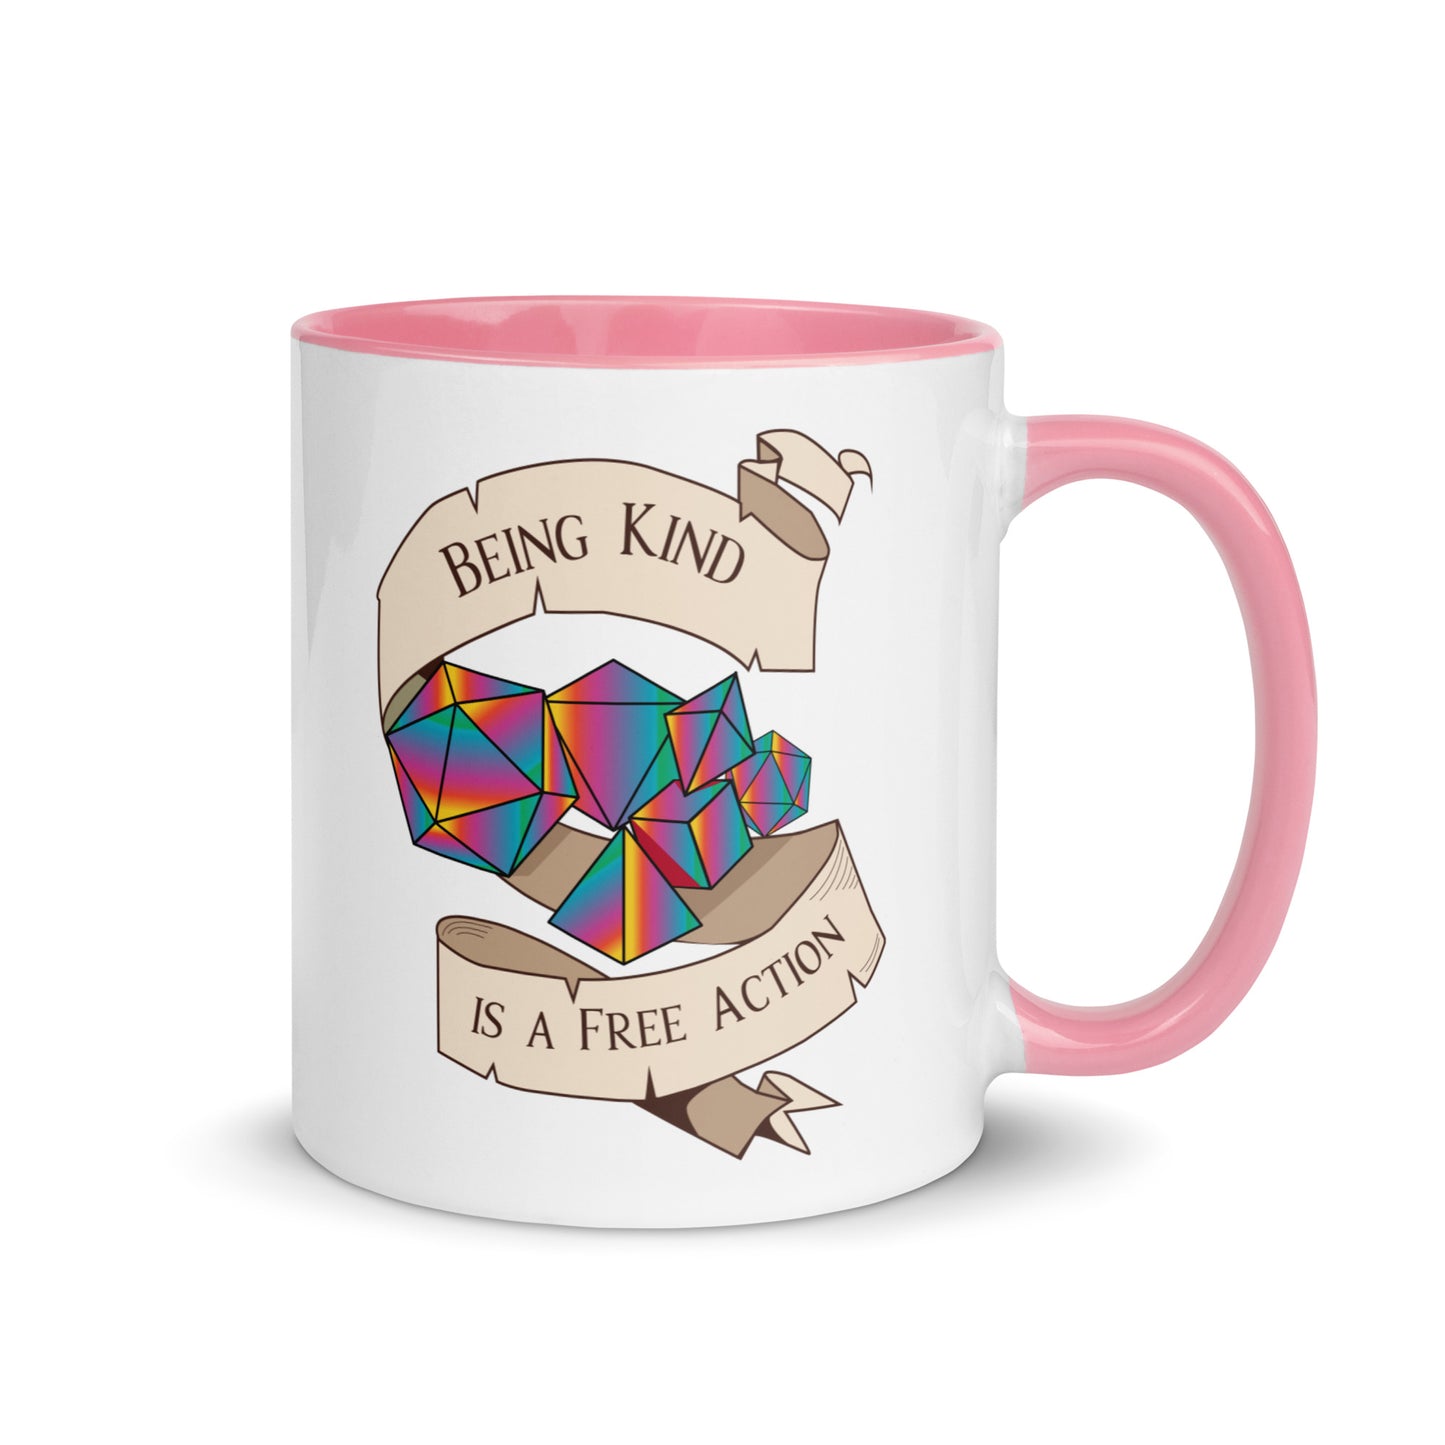 Being kind is a free action -Tabletop RPG Mug